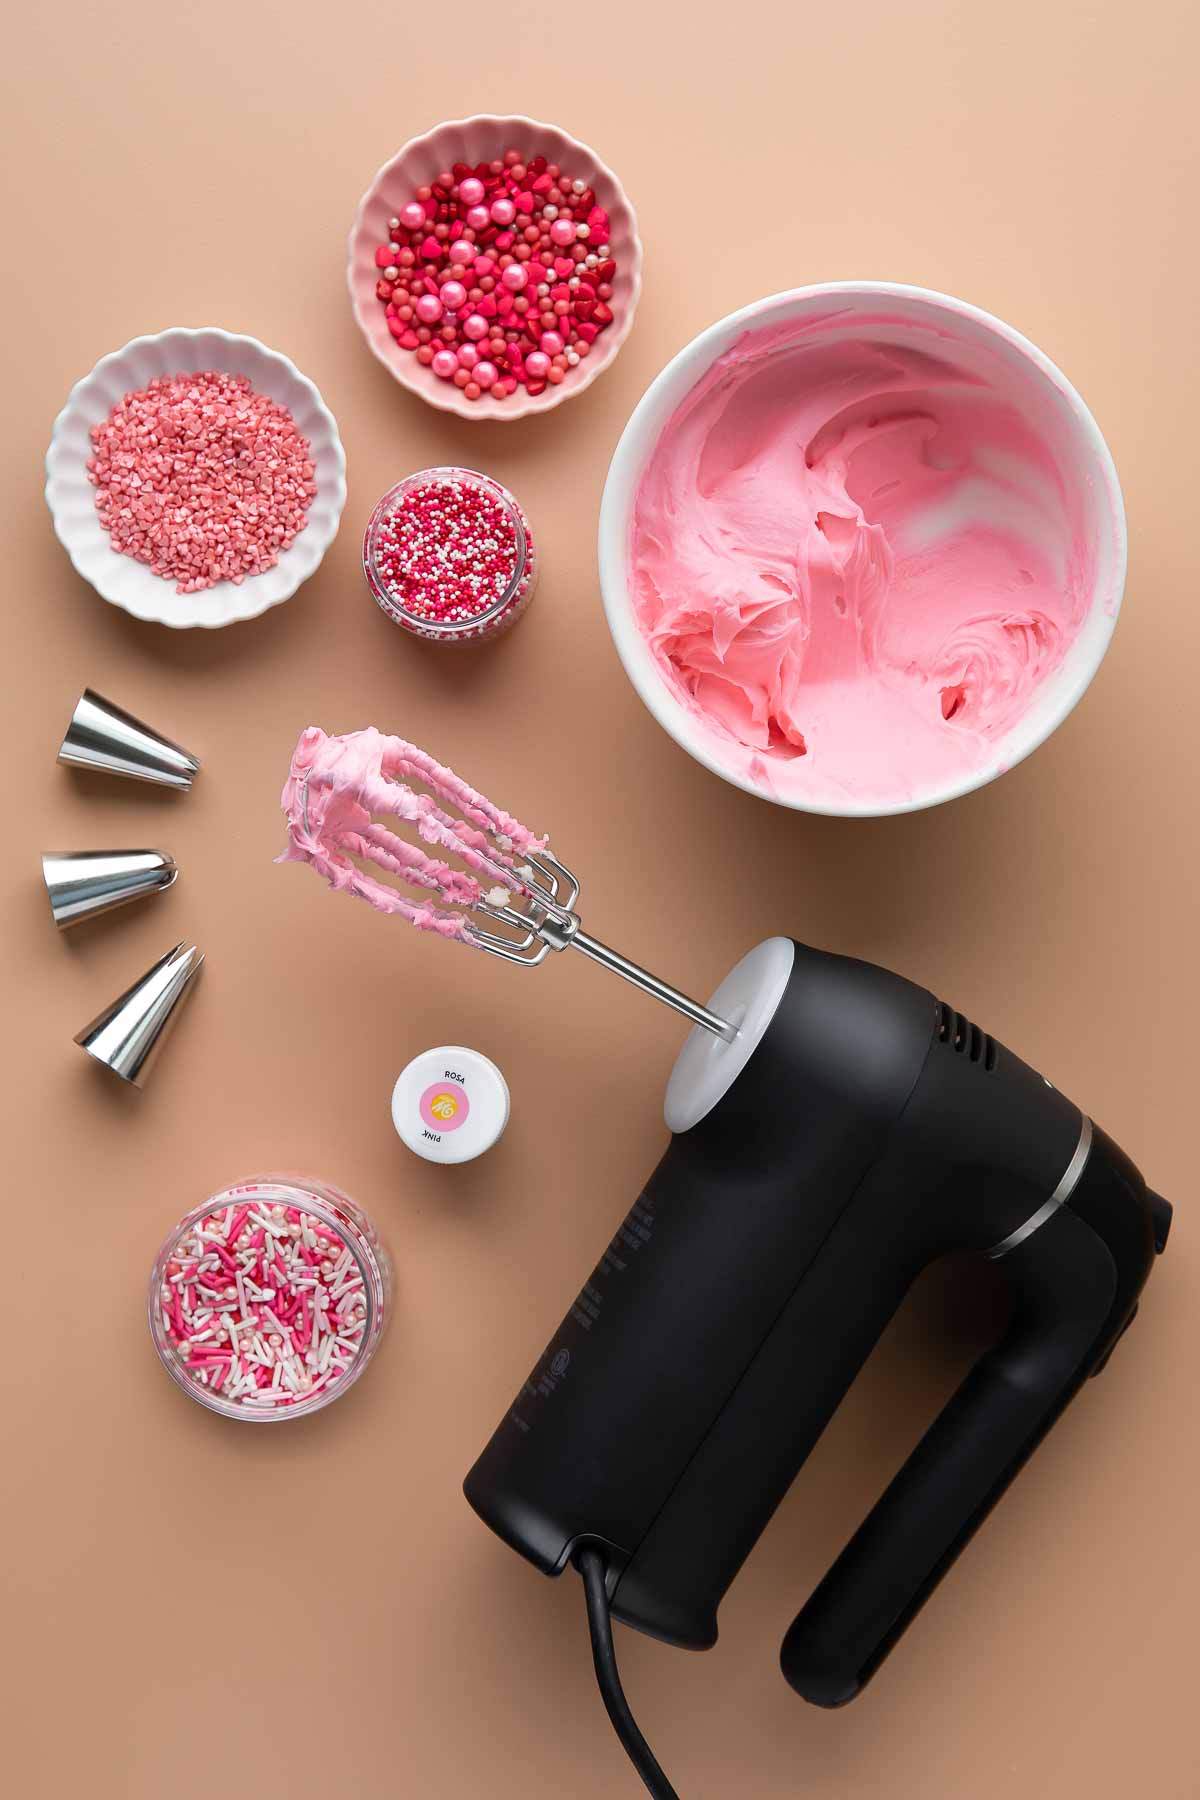 pink frosting with sprinkles, hand mixer, and piping tips